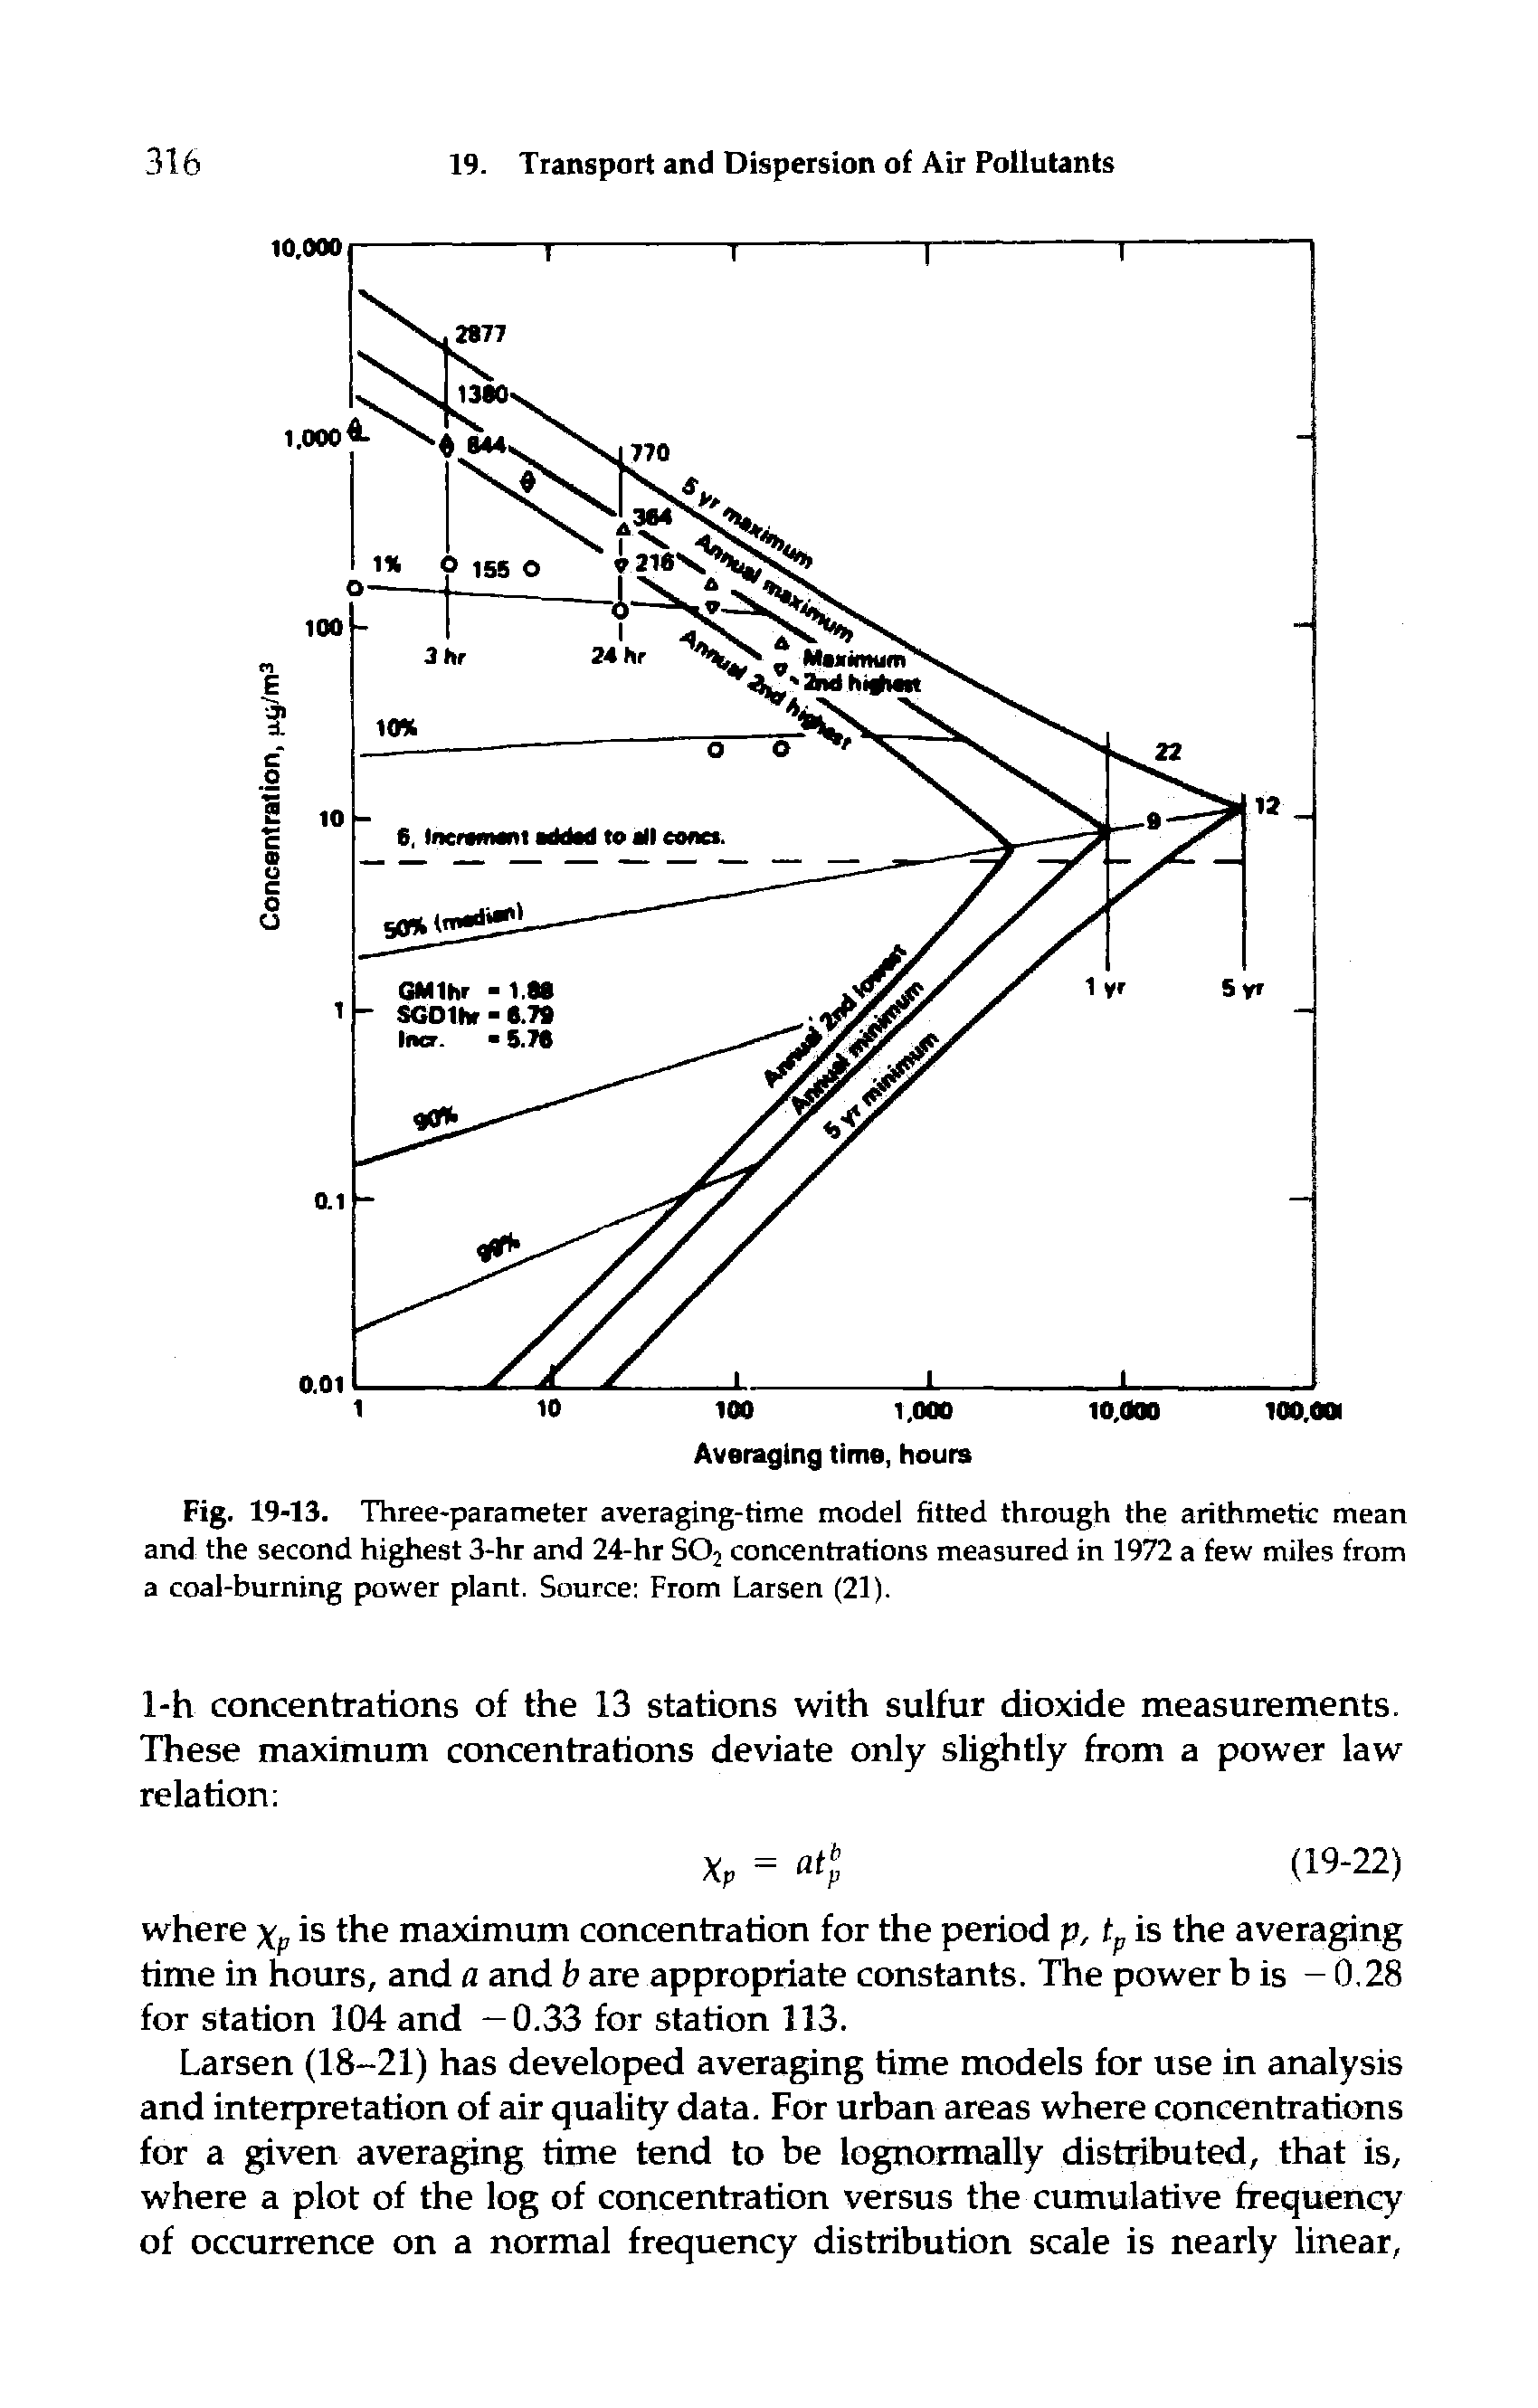 Fig. 19-13. Three-parameter averaging-time model fitted through the arithmetic mean and the second highest 3-hr and 24-hr SOj concentrations measured in 1972 a few miles from a coal-burning power plant. Source From Larsen (21).